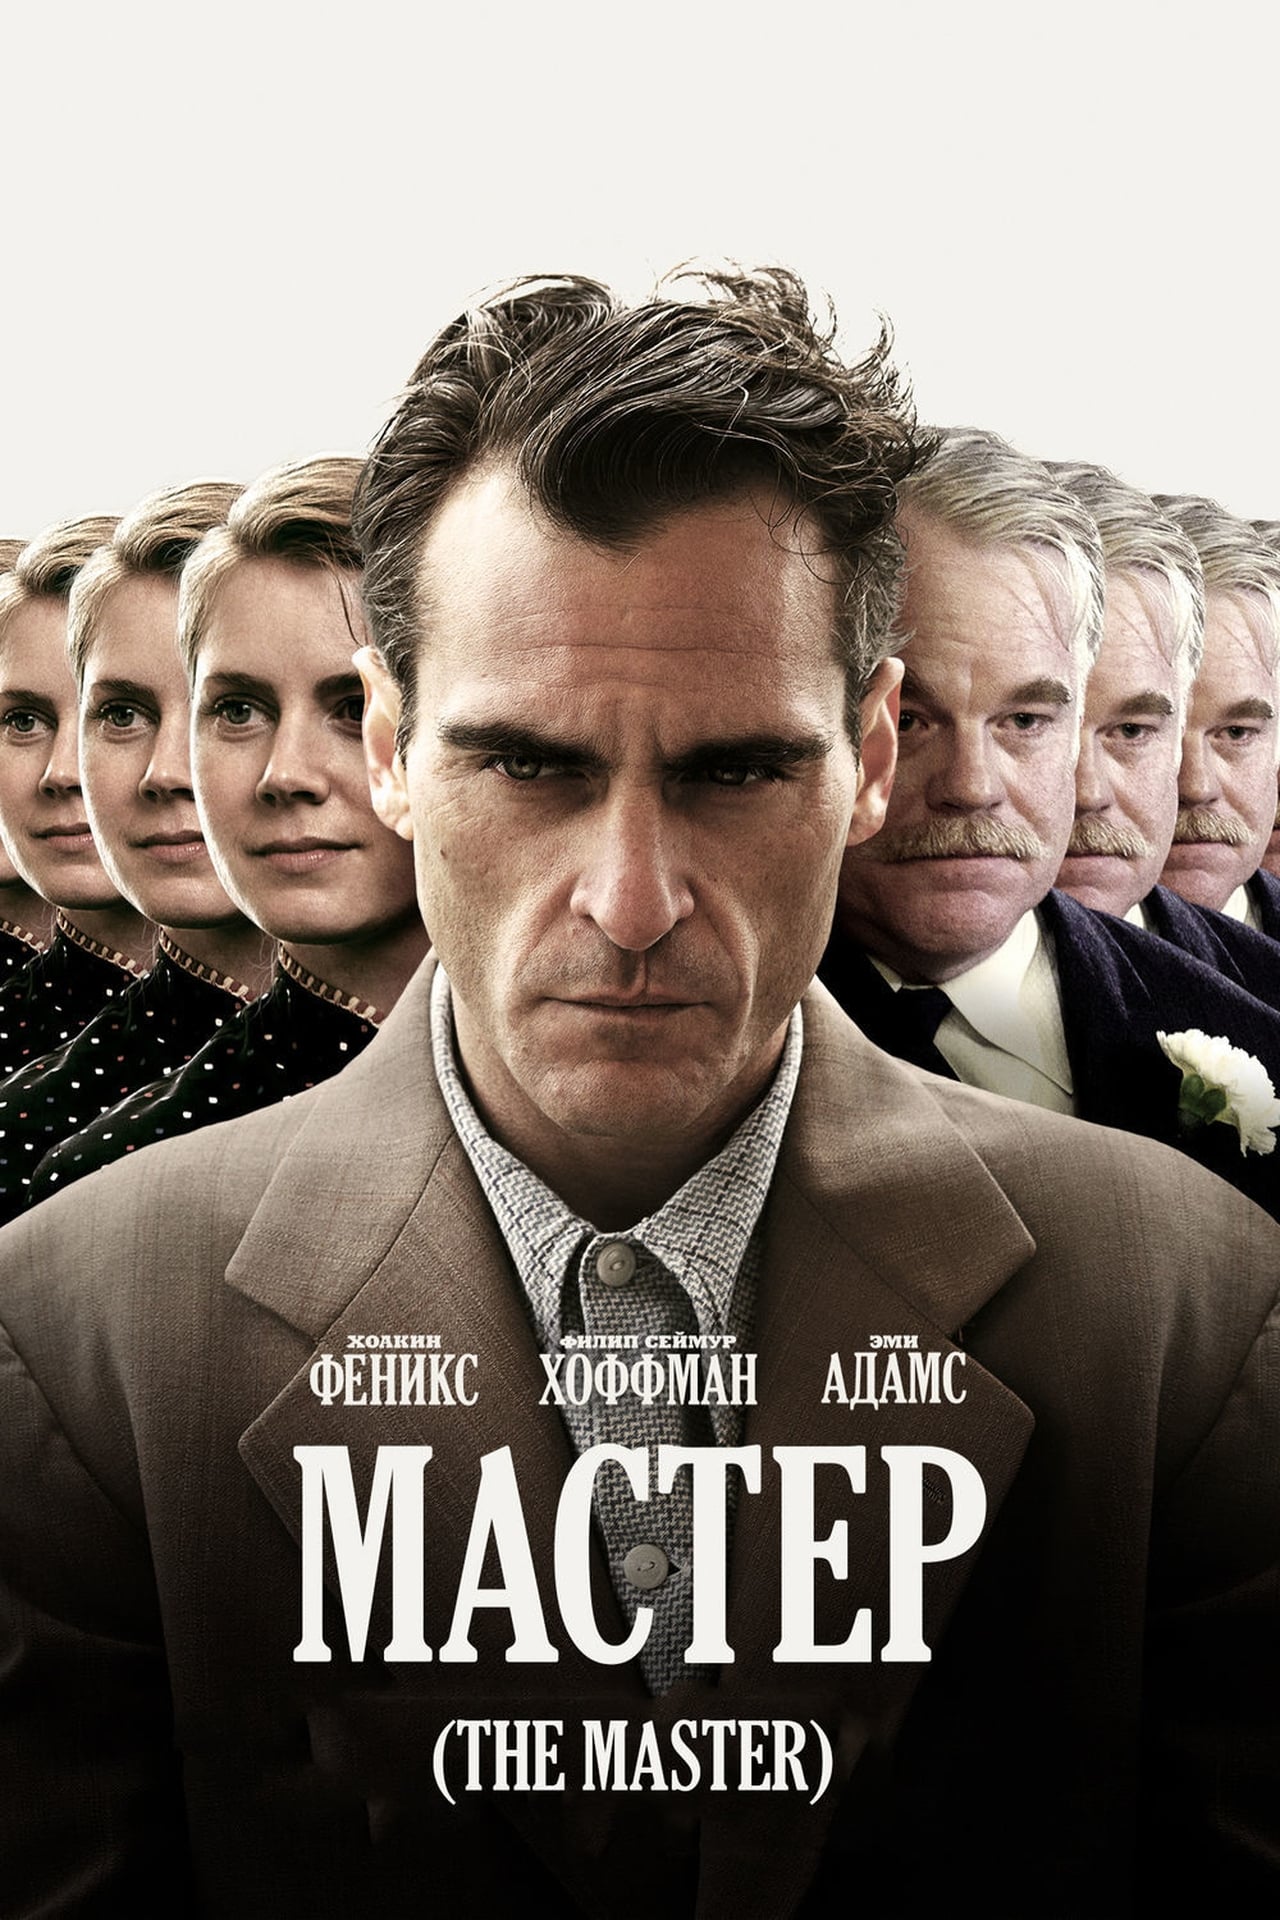 the master movie review